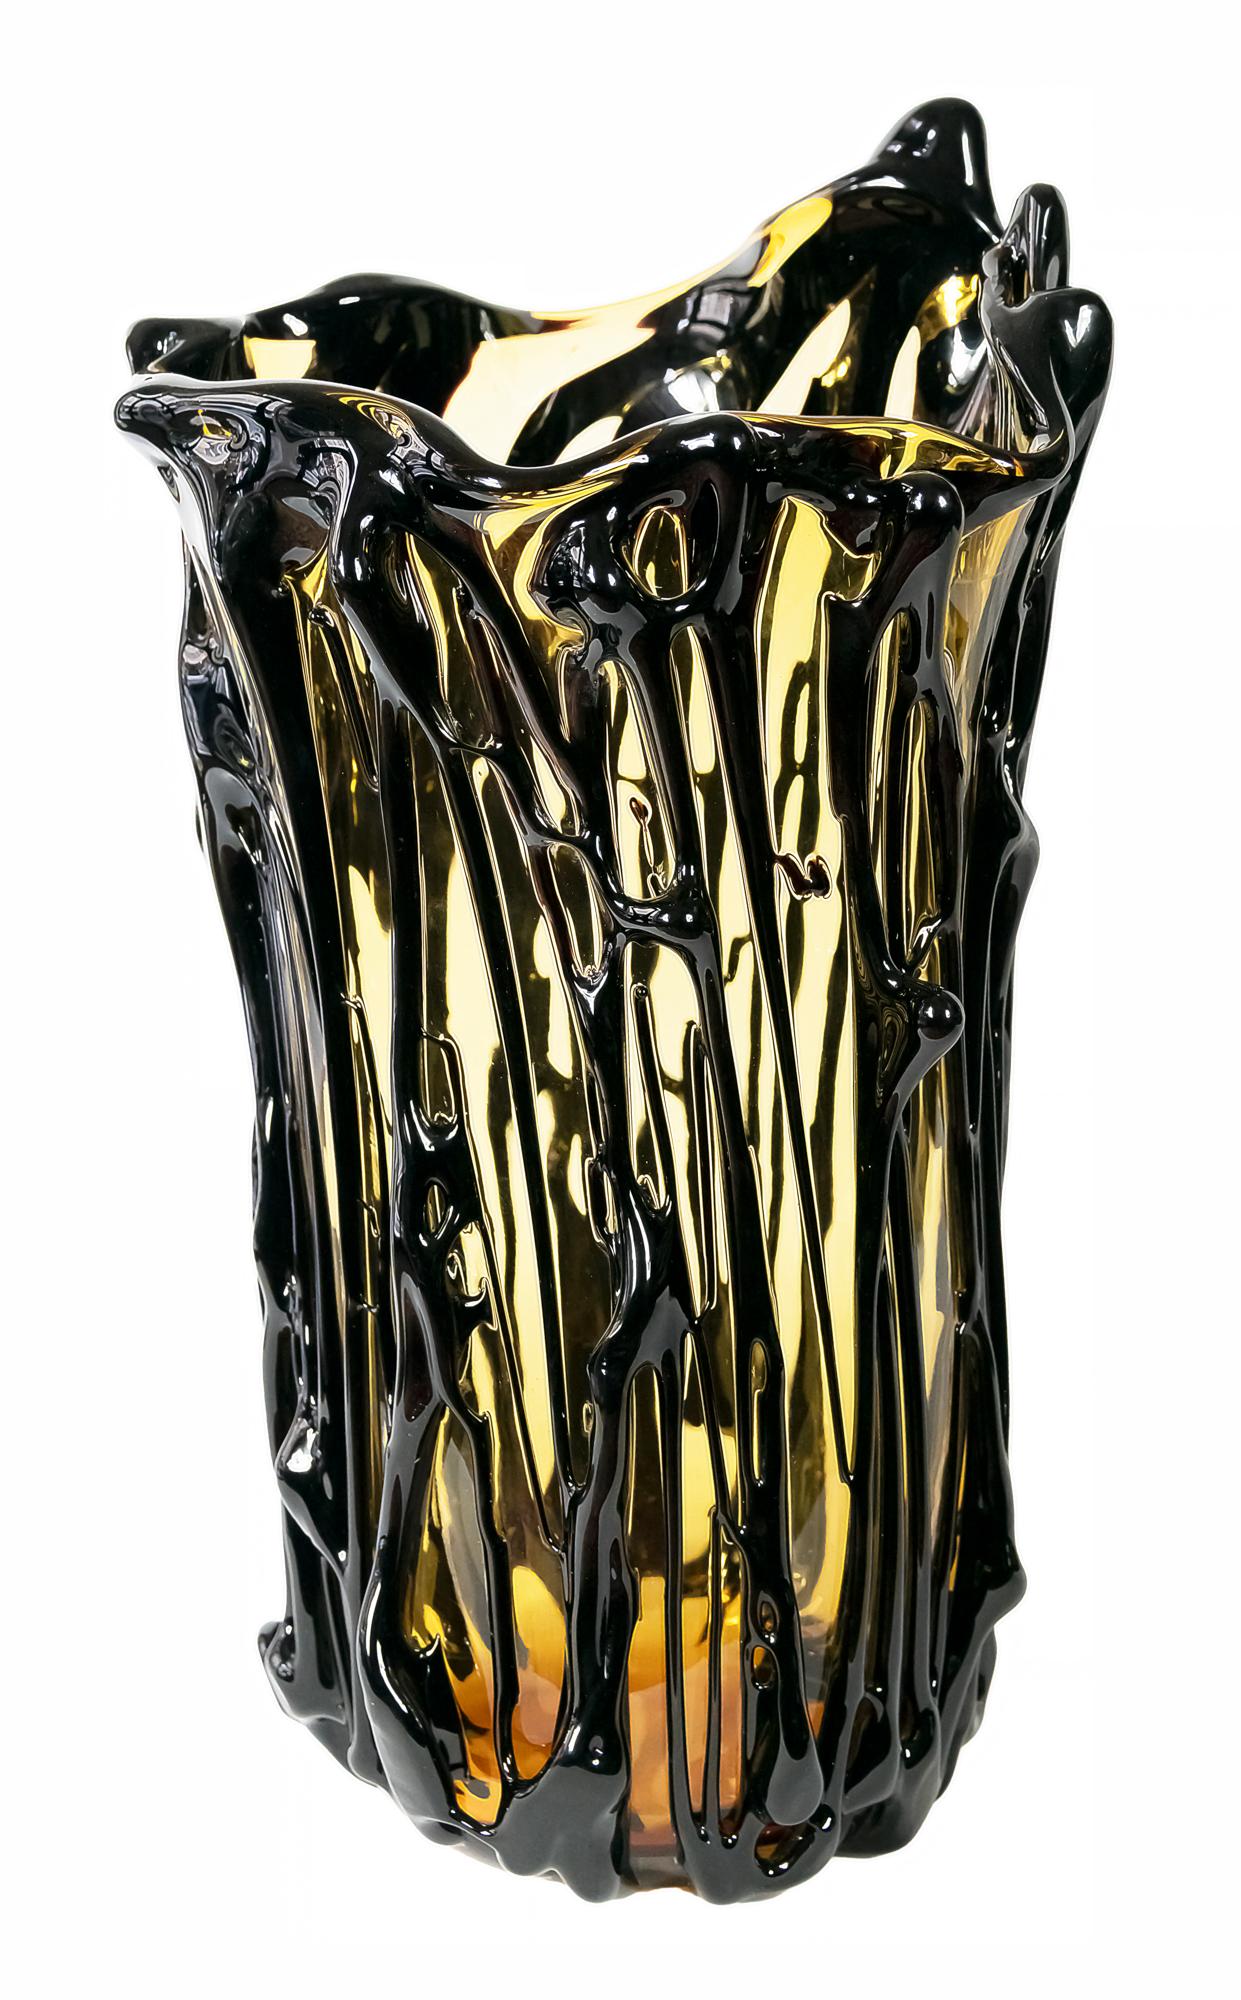 Large Italian Murano glass vase is handmade by E. Camozzo and created in asymmetric shape in two colors - ambra and black.
The vase is very heavy and solid.
Weight is 12,7 kg.
Signed on the base E. Camozzo.
 